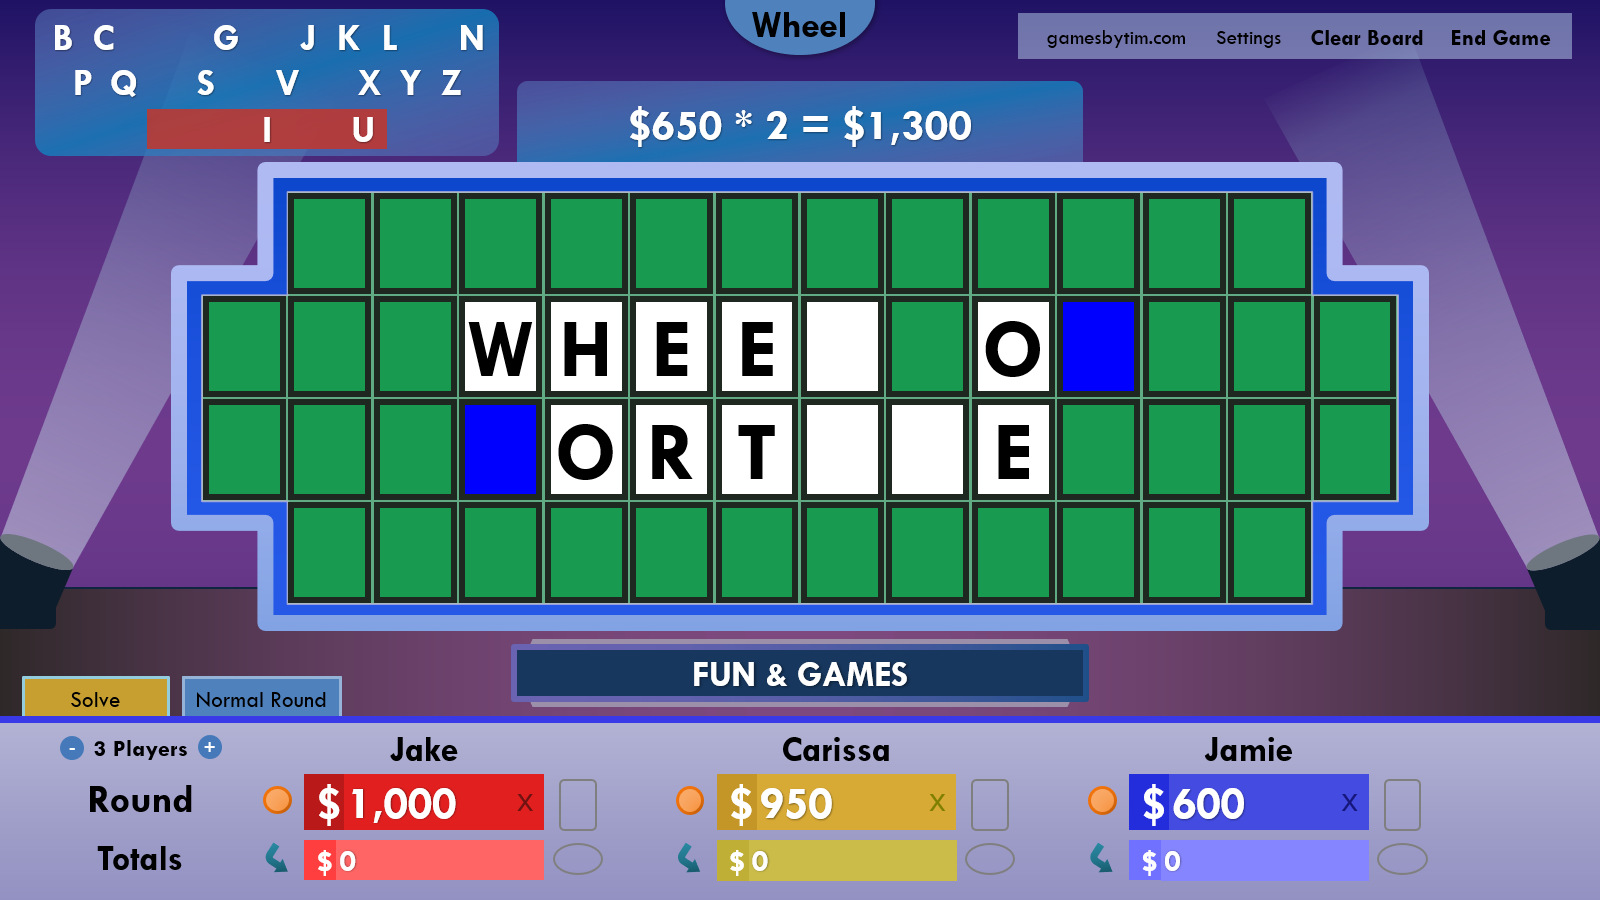 wheel of fortune template browser